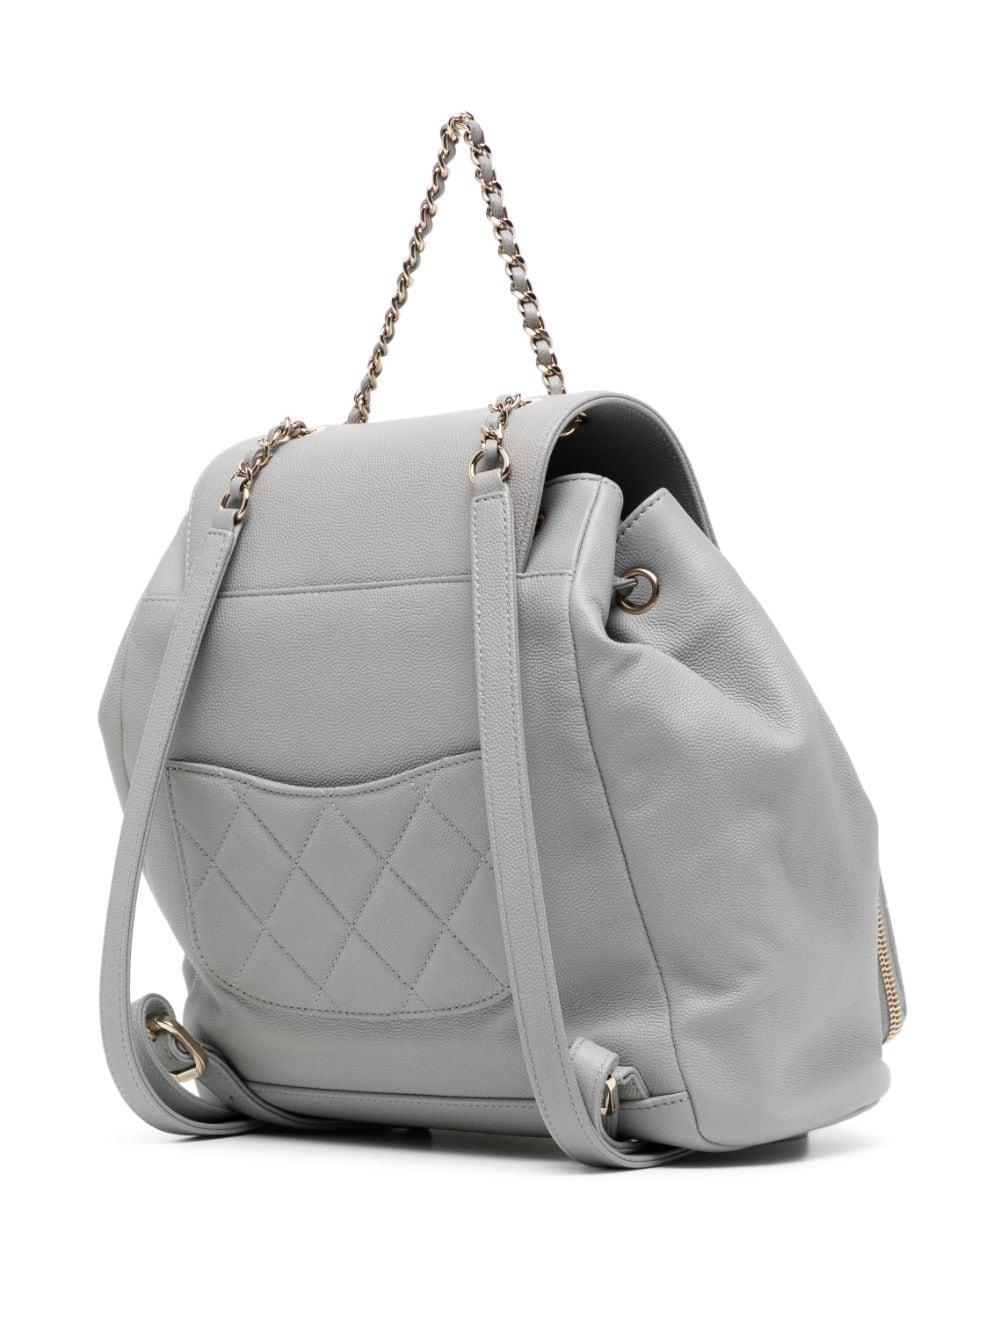 * Light grey-grained calf leather
* Diamond-quilted detailing
* Signature interlocking CC turn-lock fastening
* Foldover top with magnetic fastening
* Drawstring fastening
* Two leather and chain-link shoulder straps
* Rear patch pocket
* Front